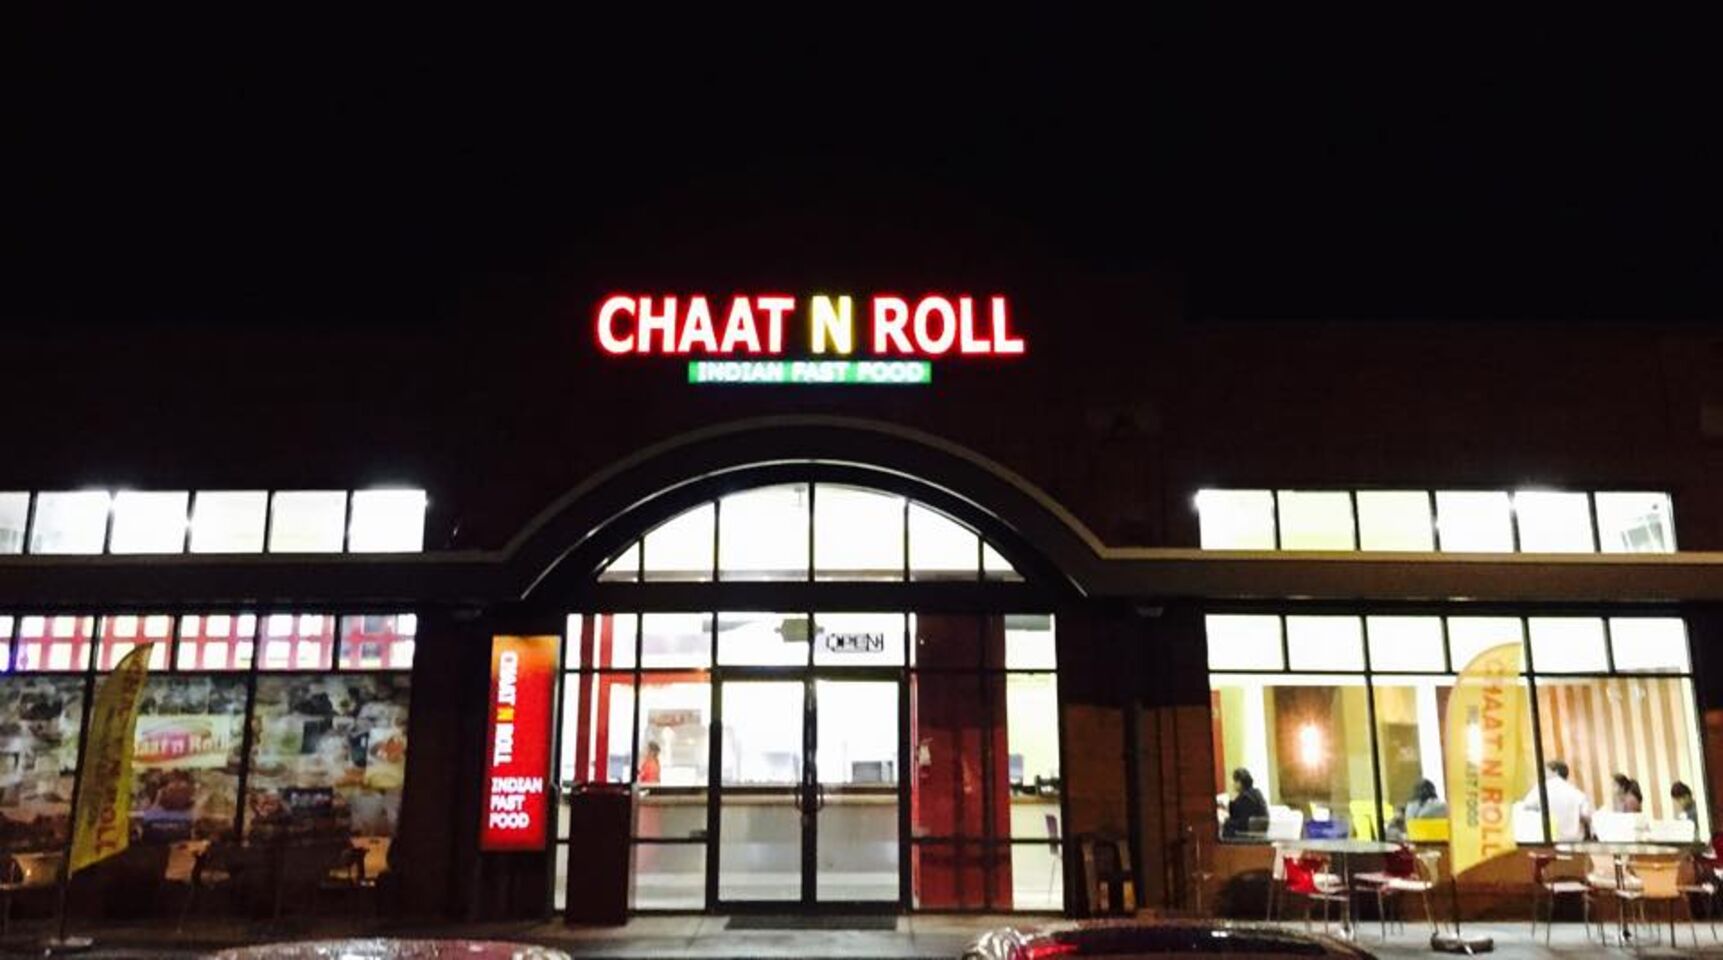 A photo of Chaat N Roll